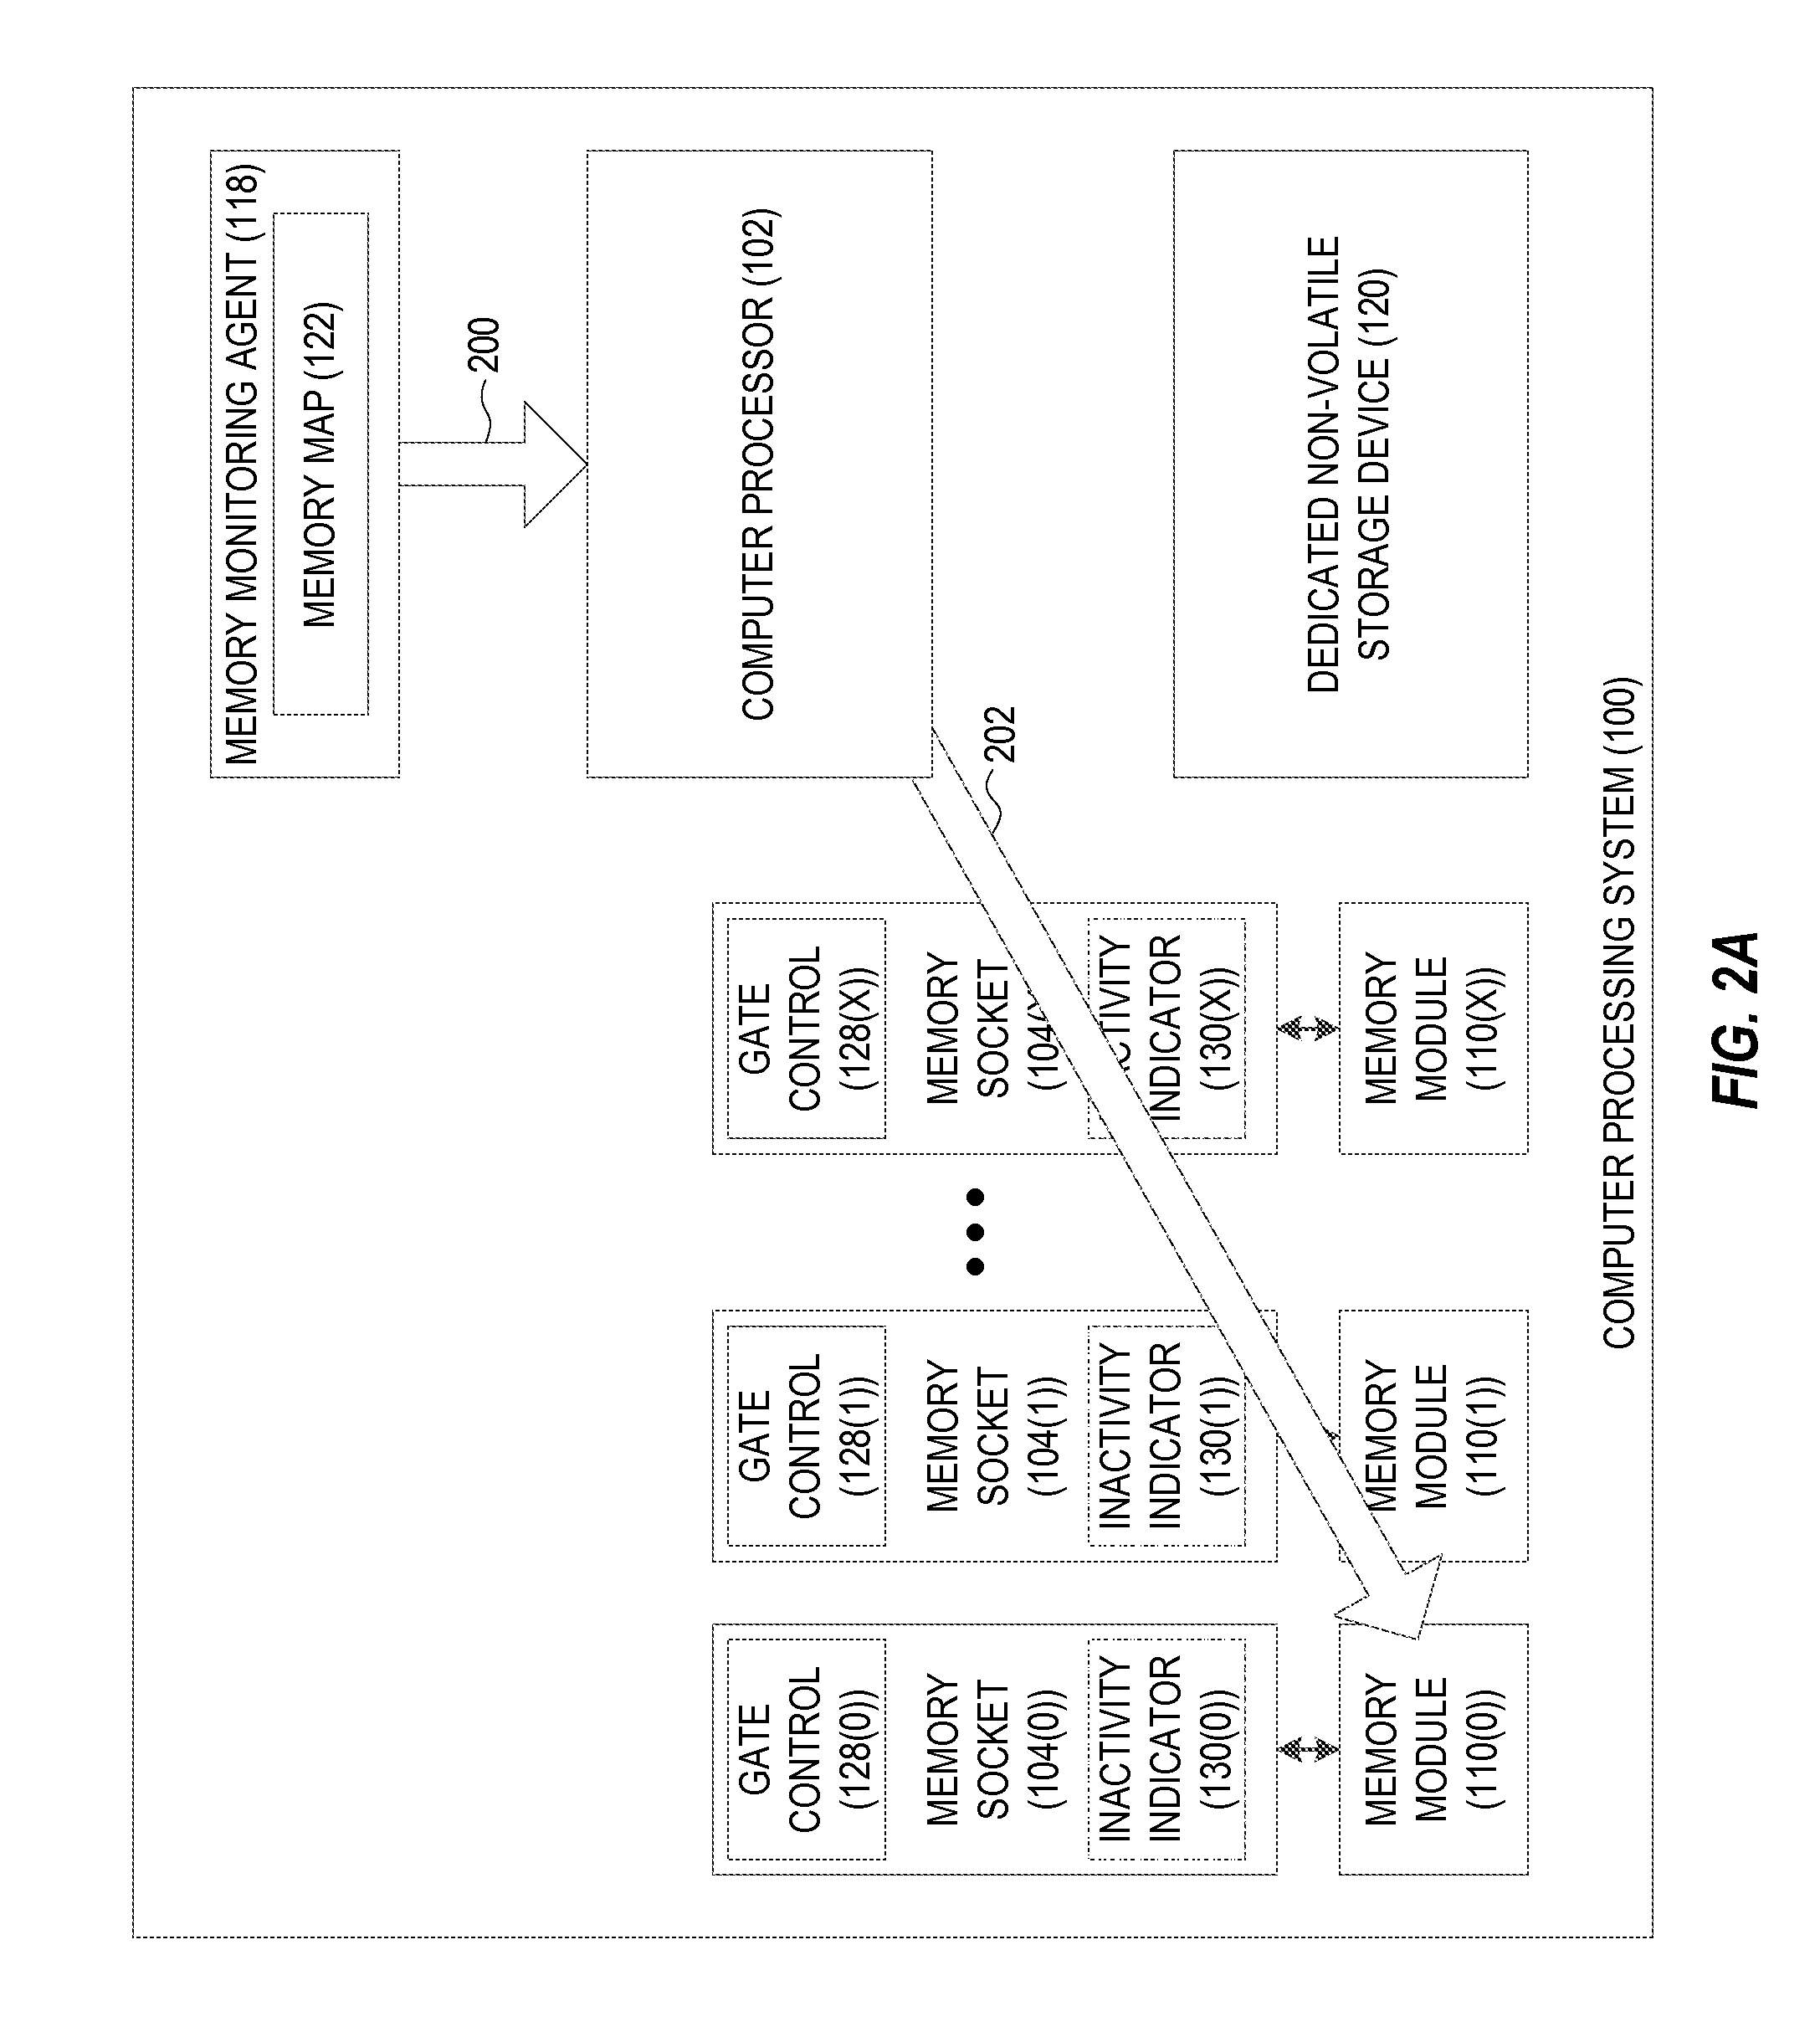 Reducing system downtime during memory subsystem maintenance in a computer processing system